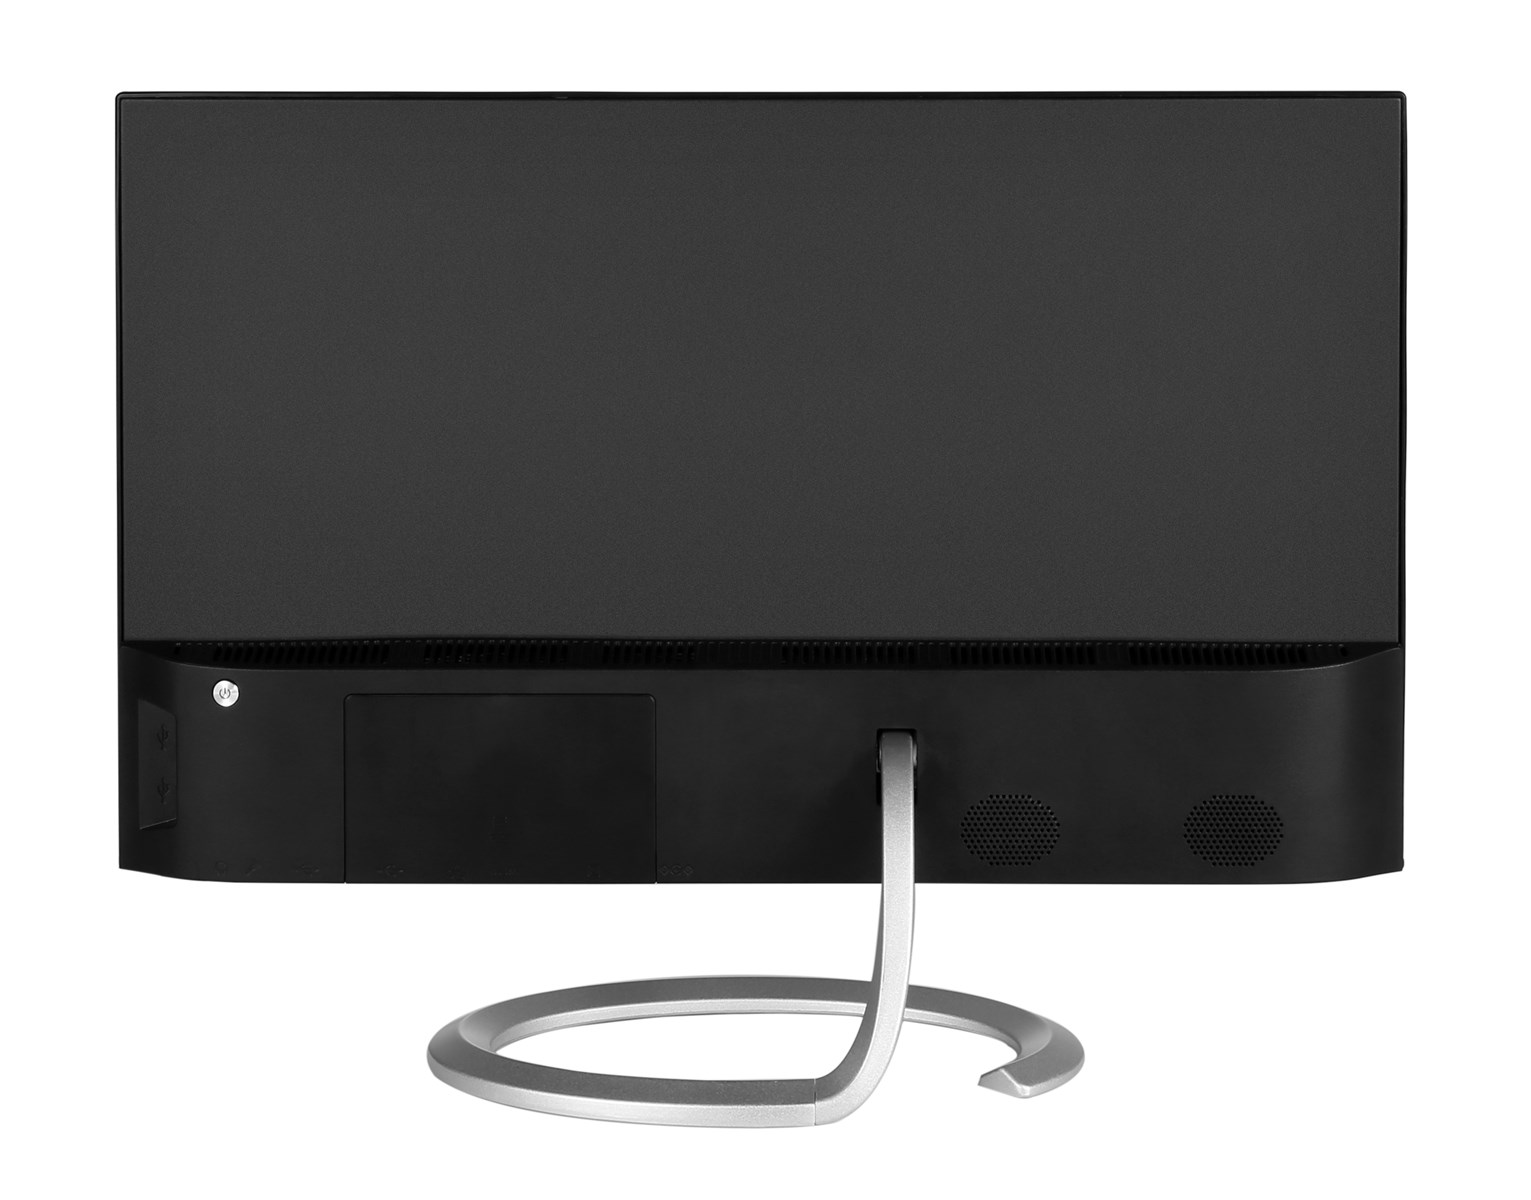 DG2108 215LED display cheap all in one PC whole sale ultra slim